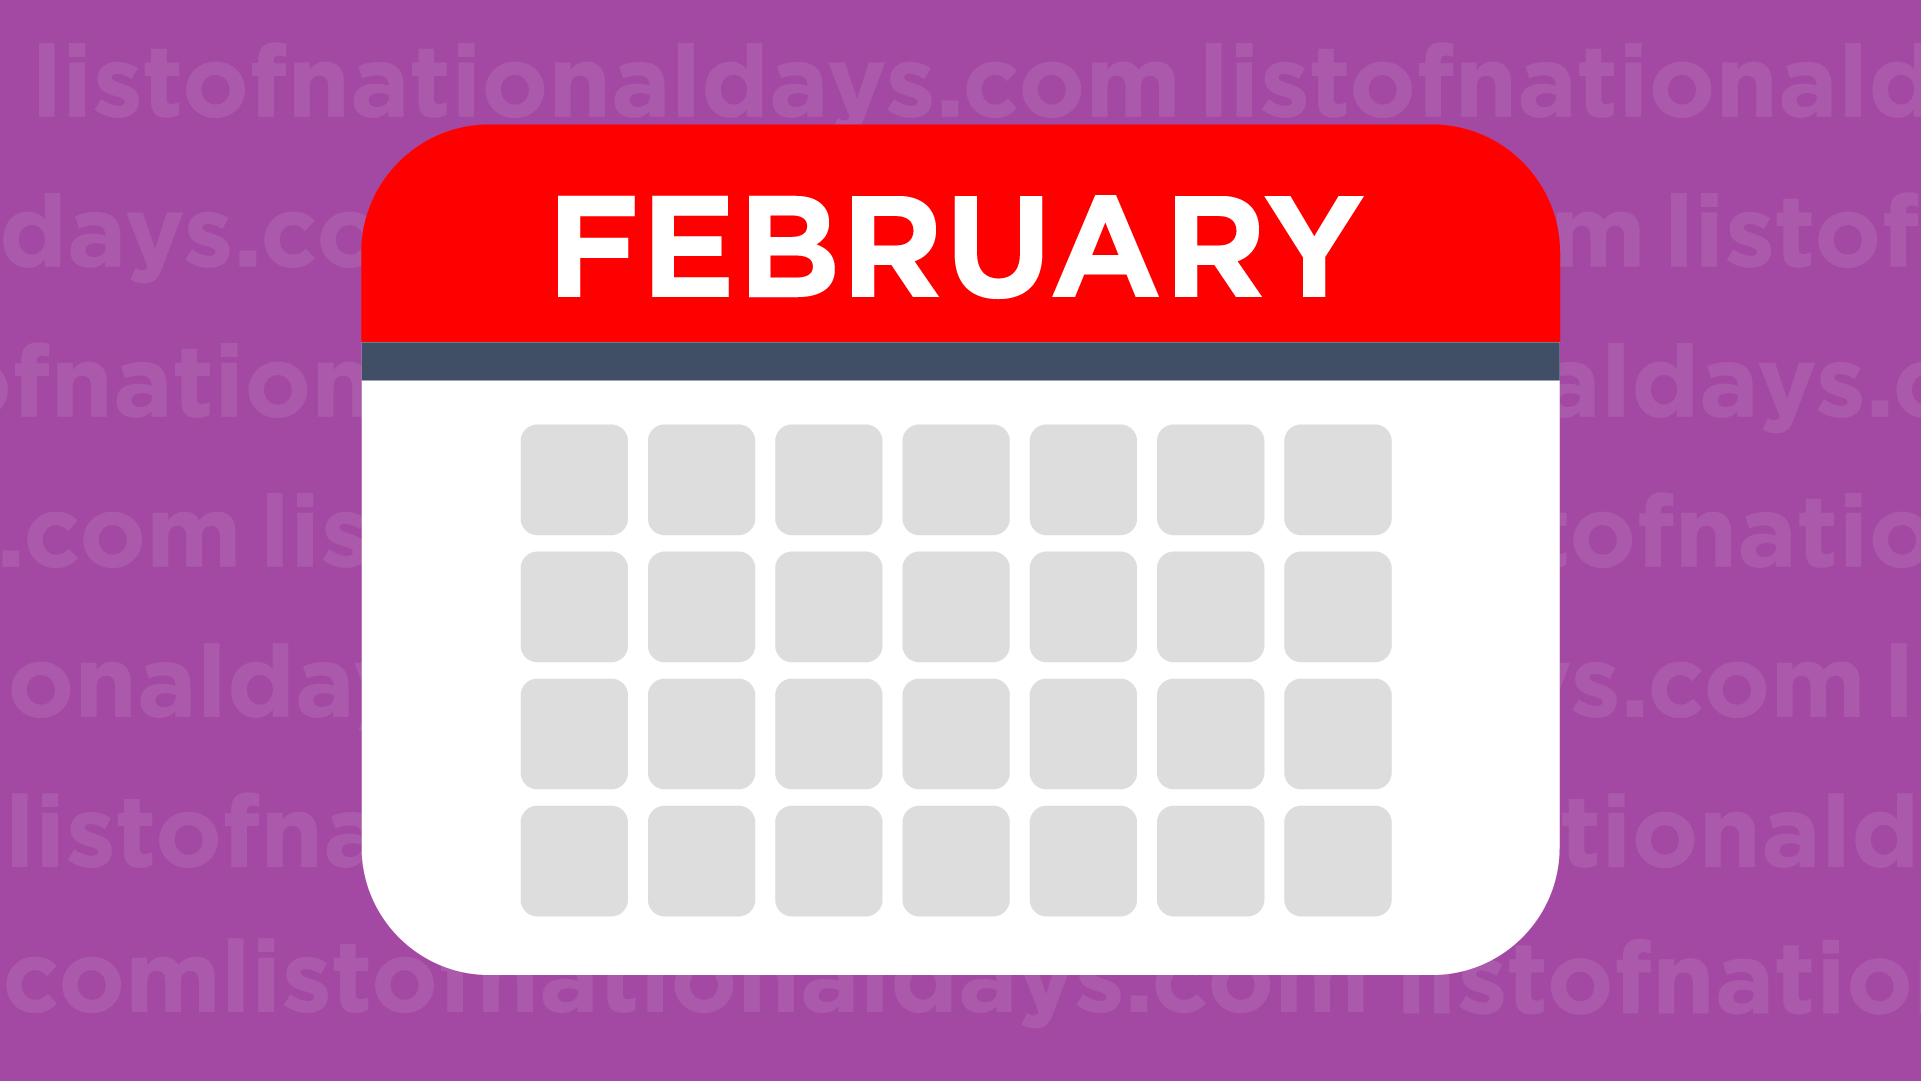 February National Days - List Of National Days